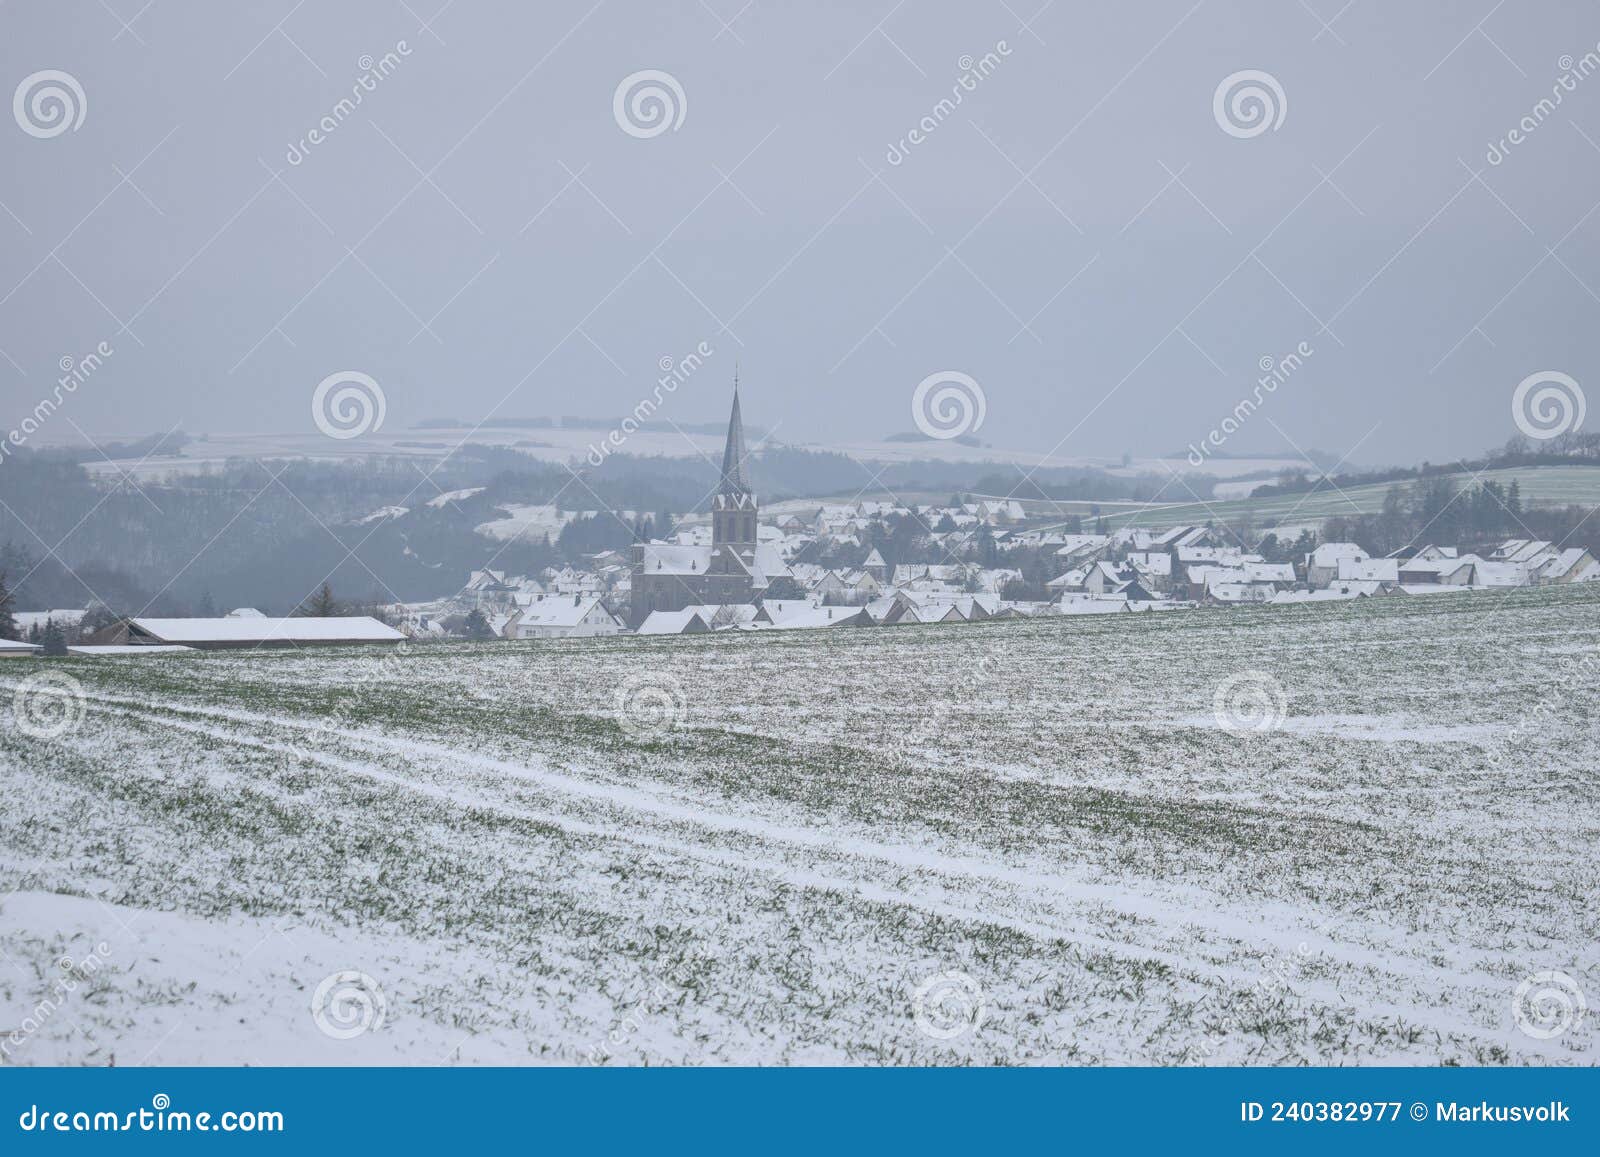 snowy landscape in the eifel with the village welling in a valley